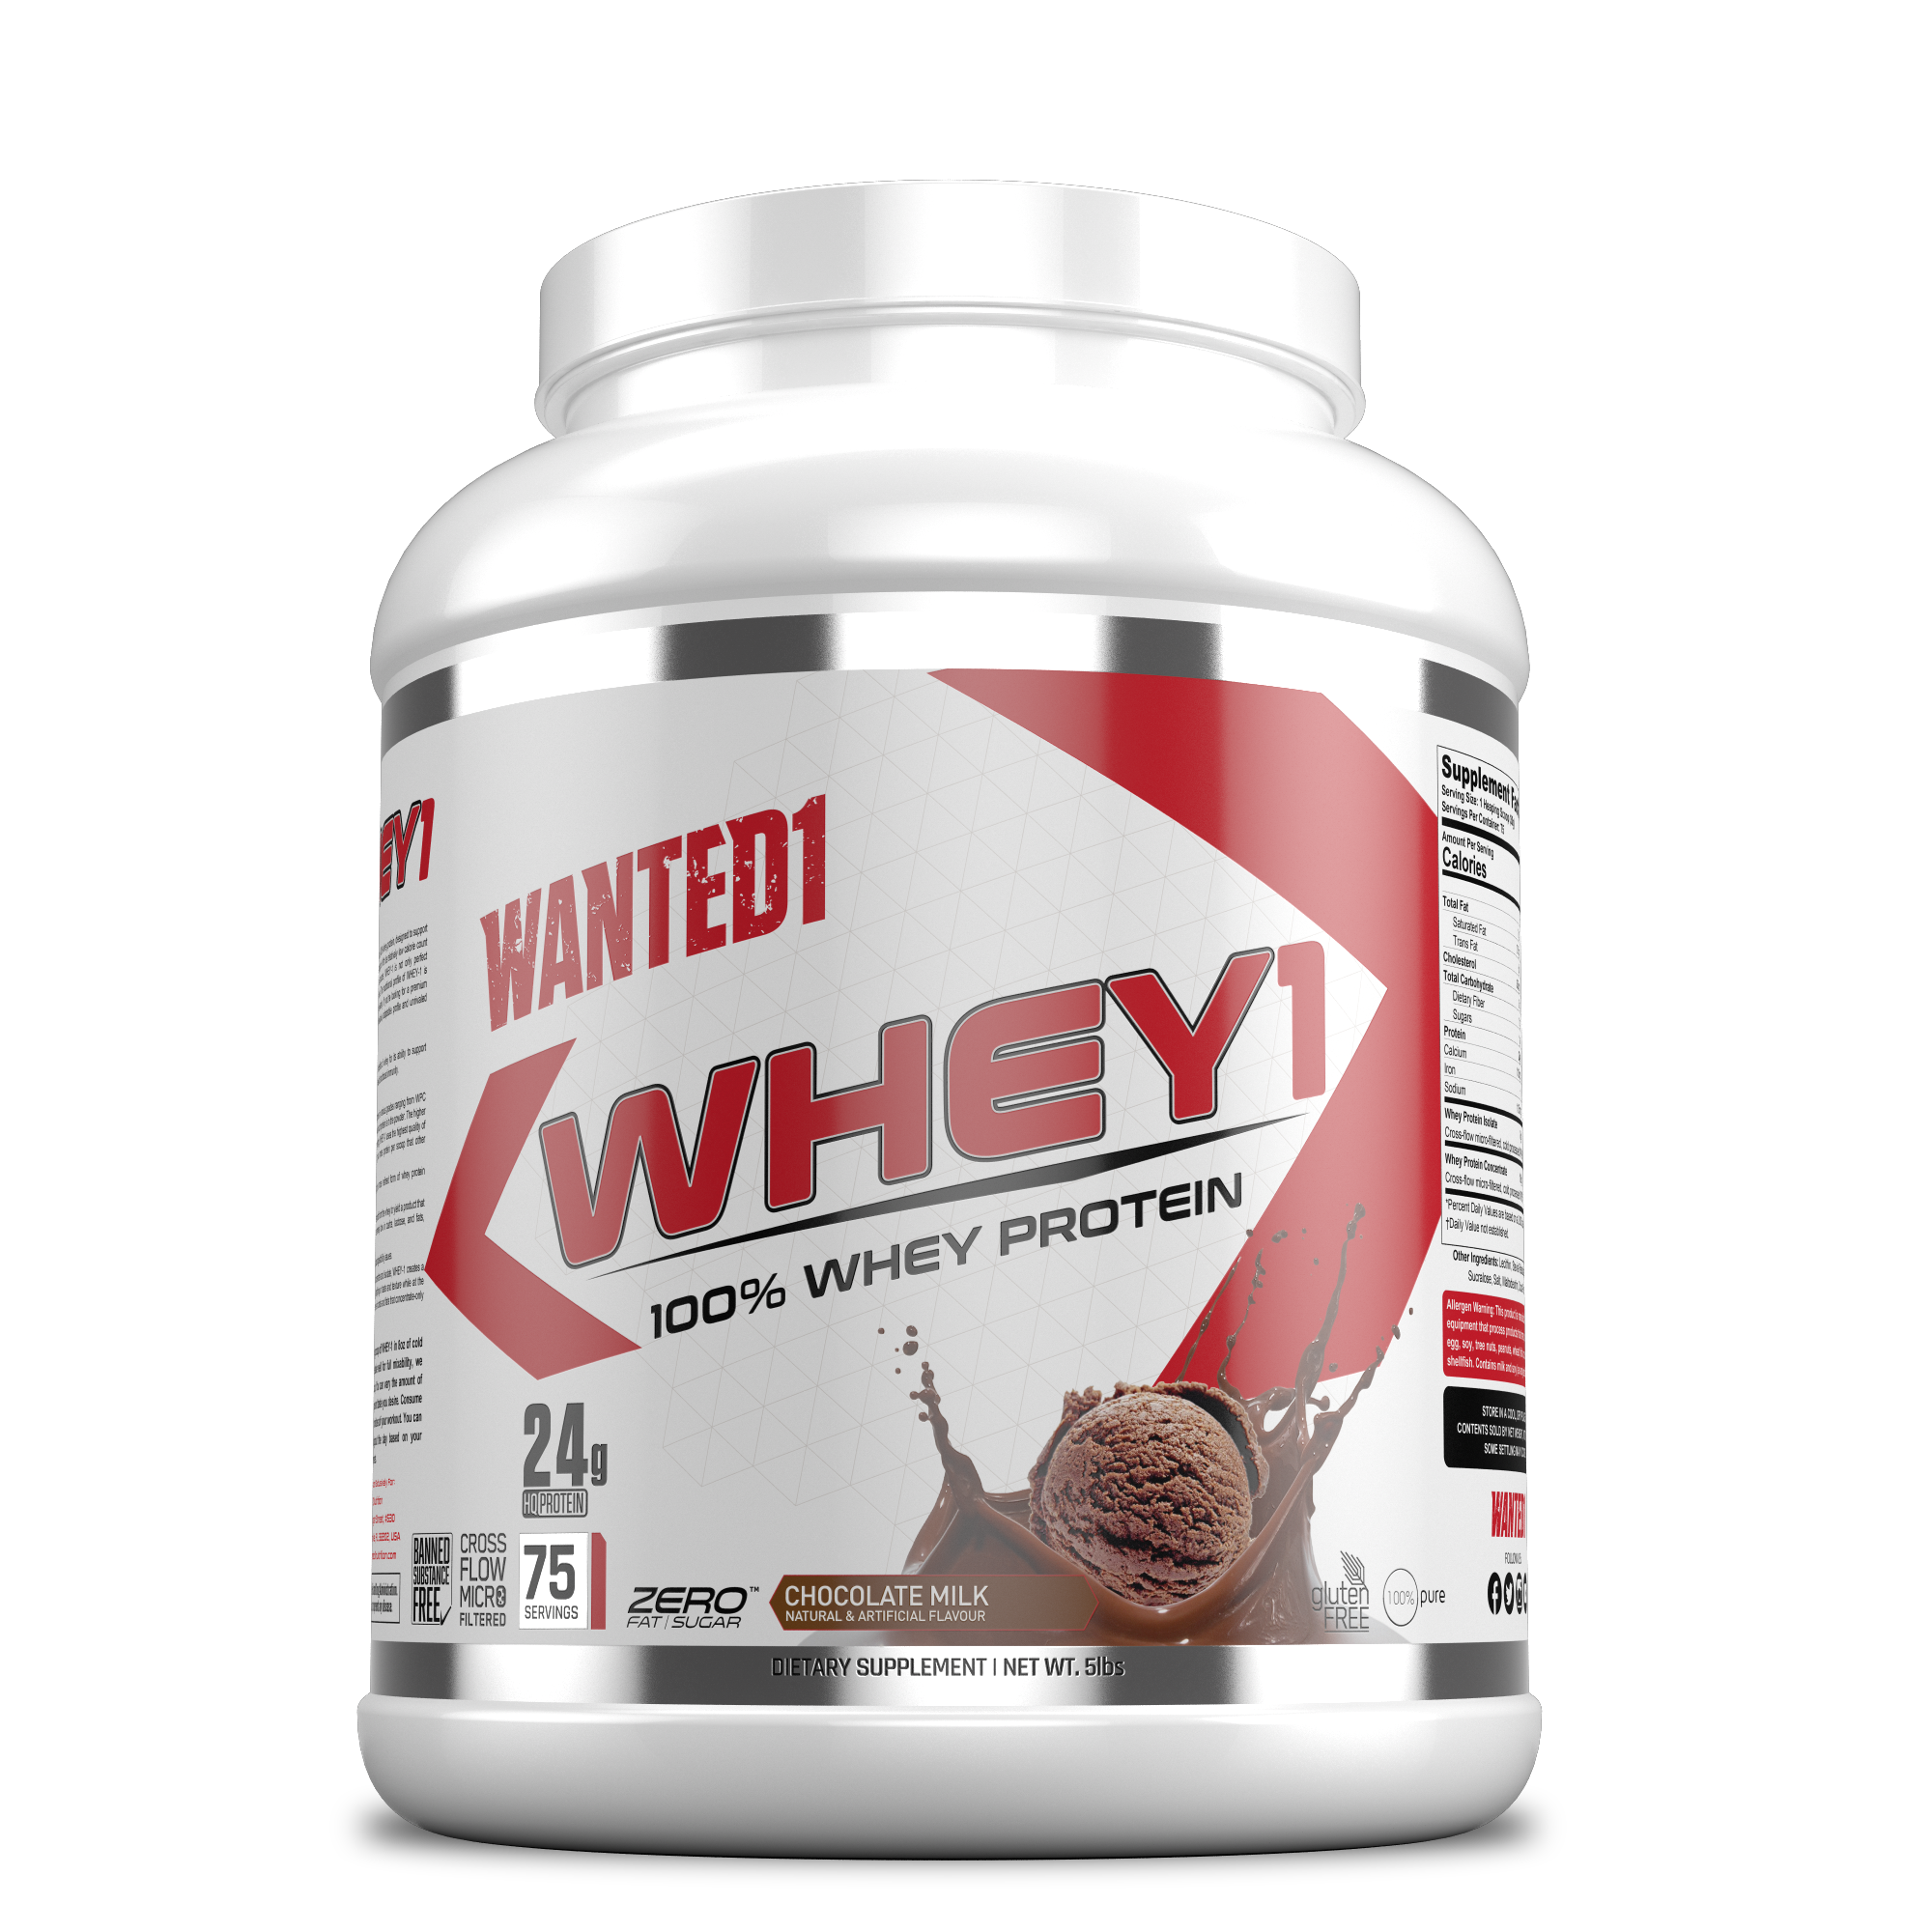 Wanted1 Whey1 -100% Whey Protein - 5lbs